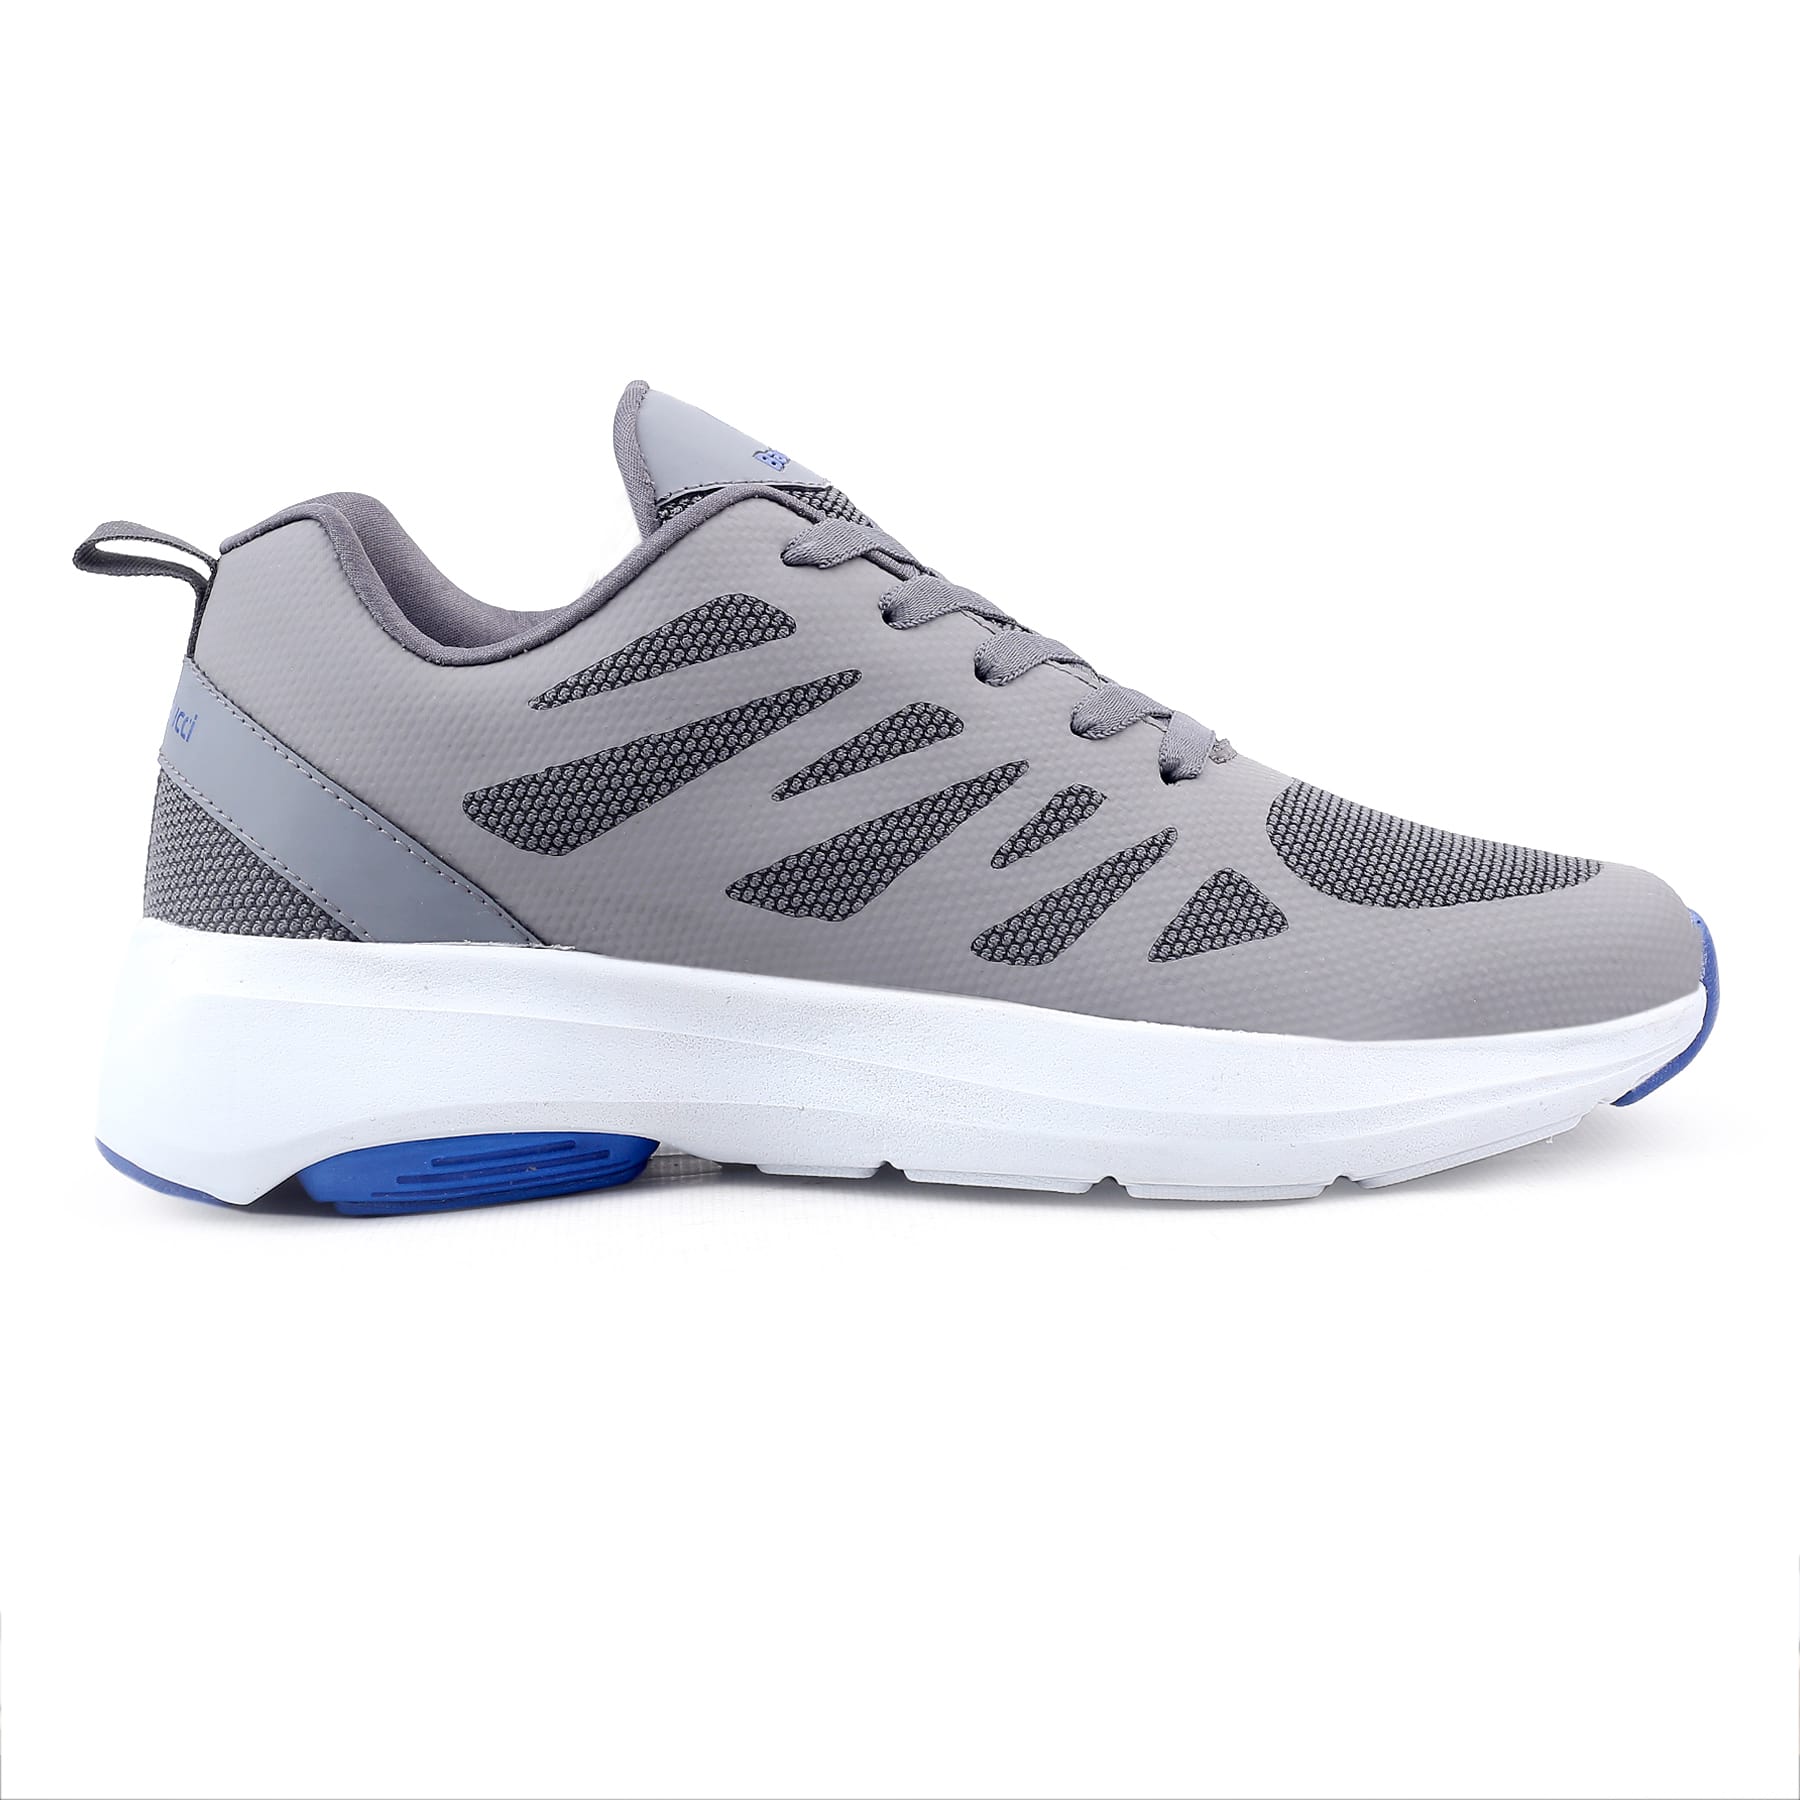 Bacca Bucci BOAT Athleisure Sports Shoes with Extra-Light Phylon Outsole & comTECH Padded Insocks